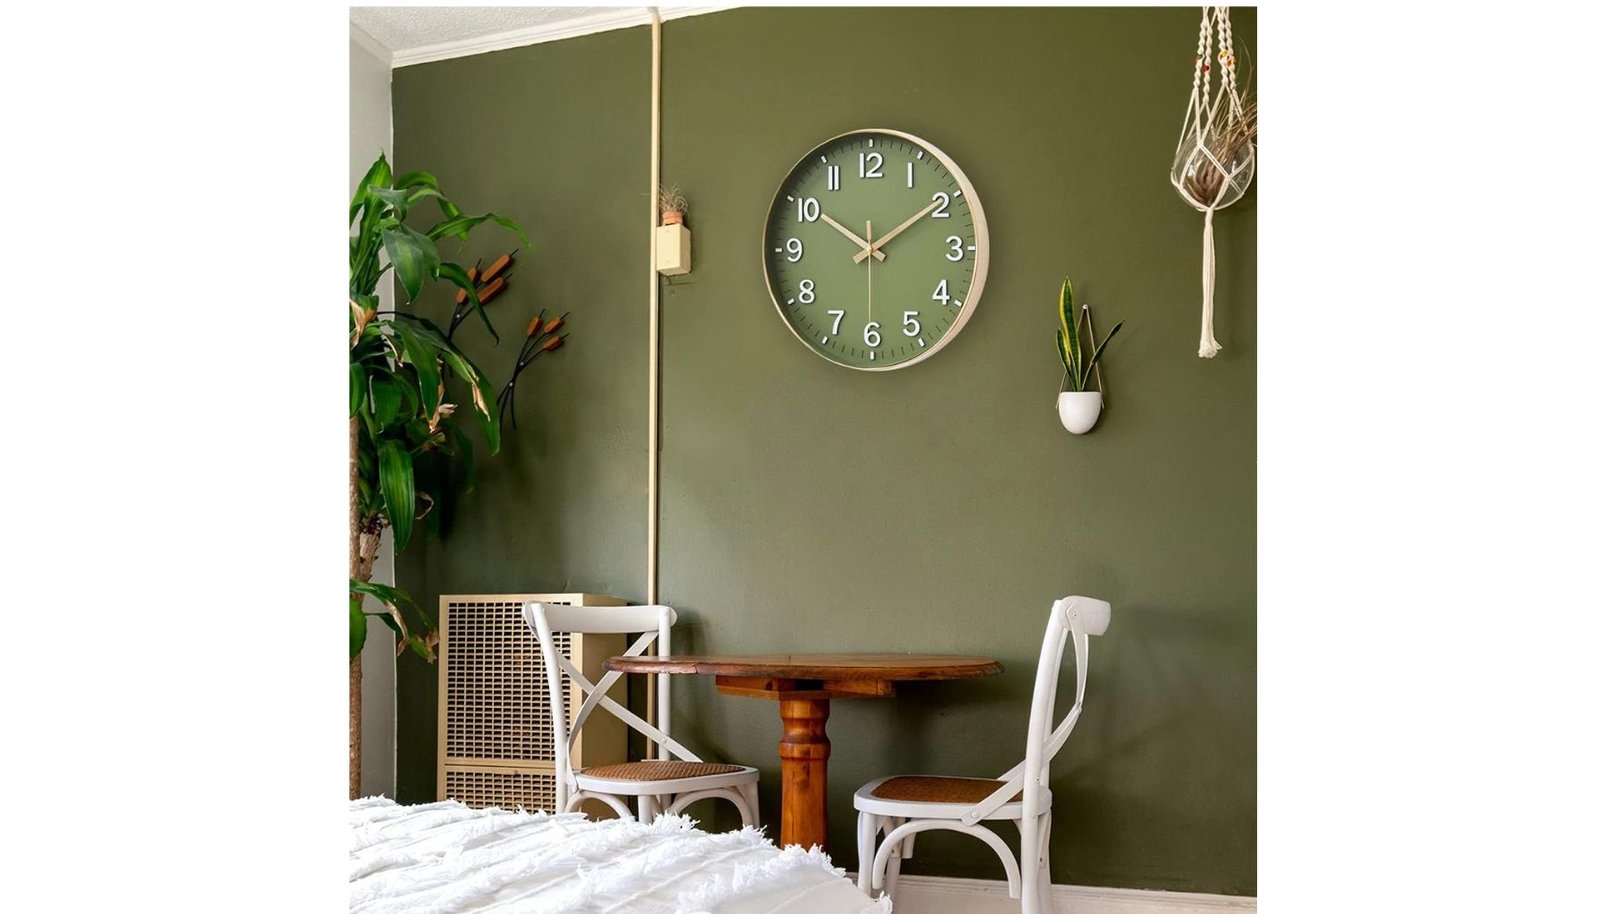 HZDHCLH 12 Inch Silent Non-Ticking Kitchen Room Wall Clock Review